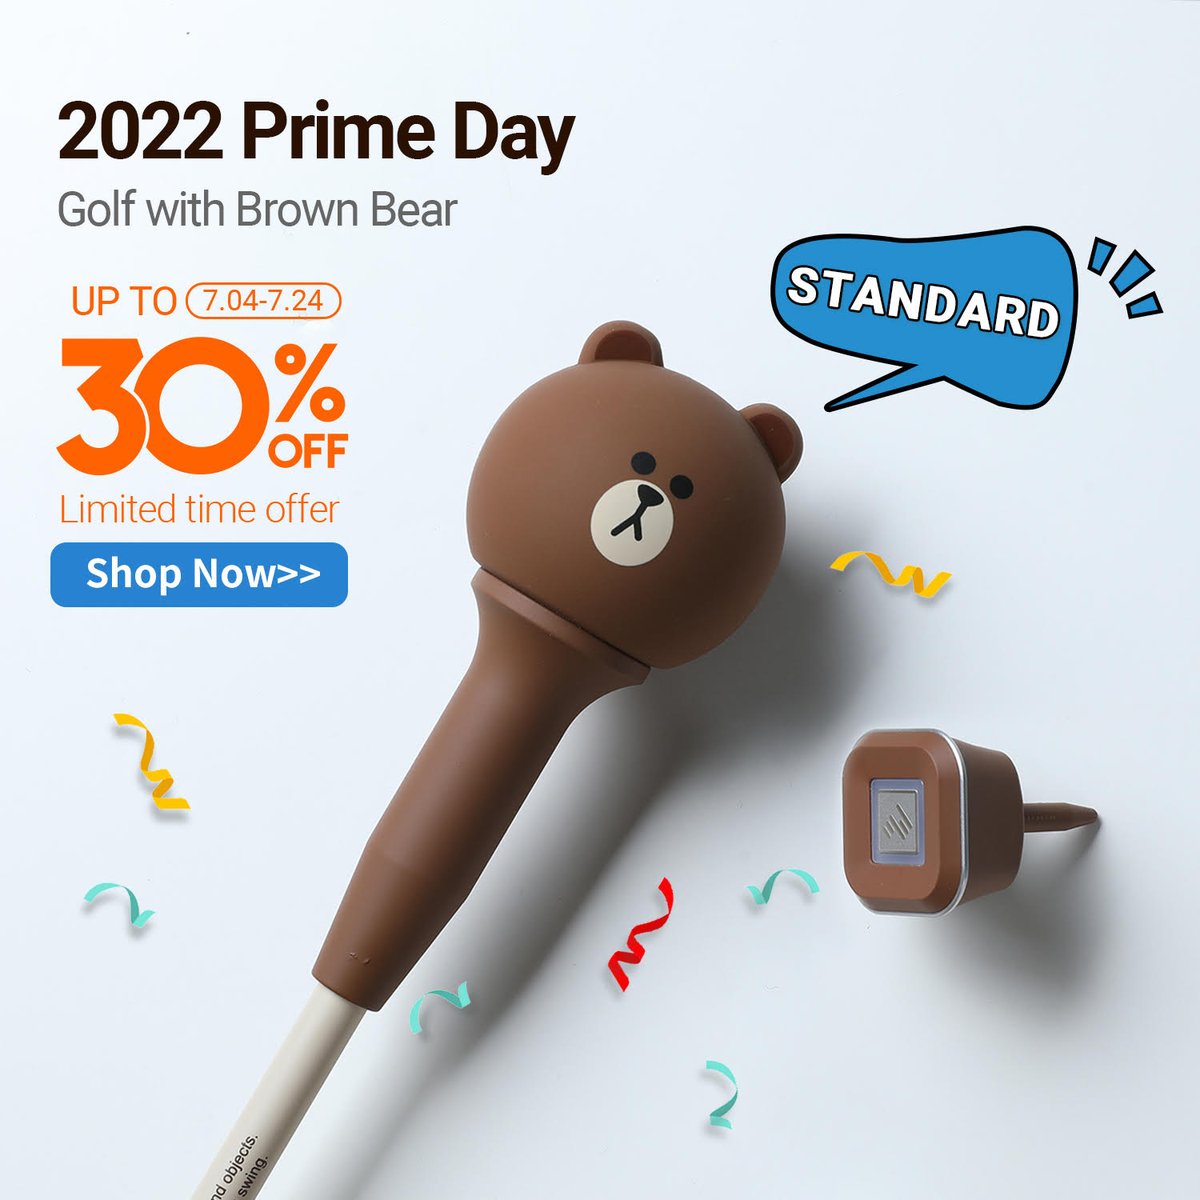 The BIGGEST promotion of the year! TIME LIMITED 30% OFF for the most innovative home golf simulator from Phigolf !!! ⠀ Available on Amazon: amazon.com/dp/B07RK9RZLW Swing with Phigolf and have fun together : ) #Golflovers #Phigolf #Golfsimulator #Homegolf #amazondeals